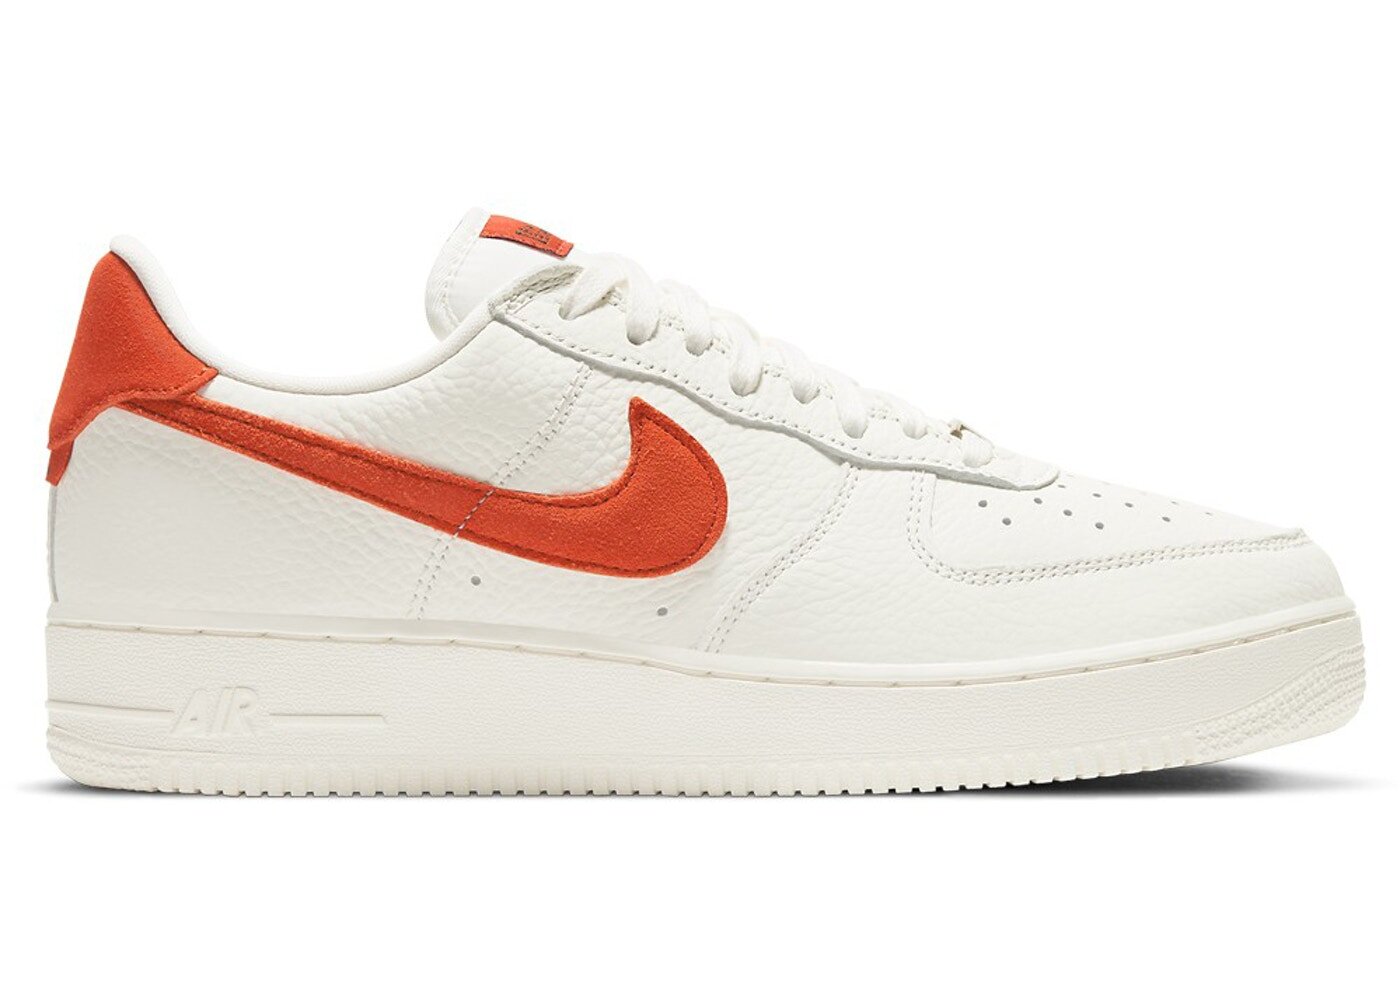 Now Available: Nike Air Force 1 Low Craft 